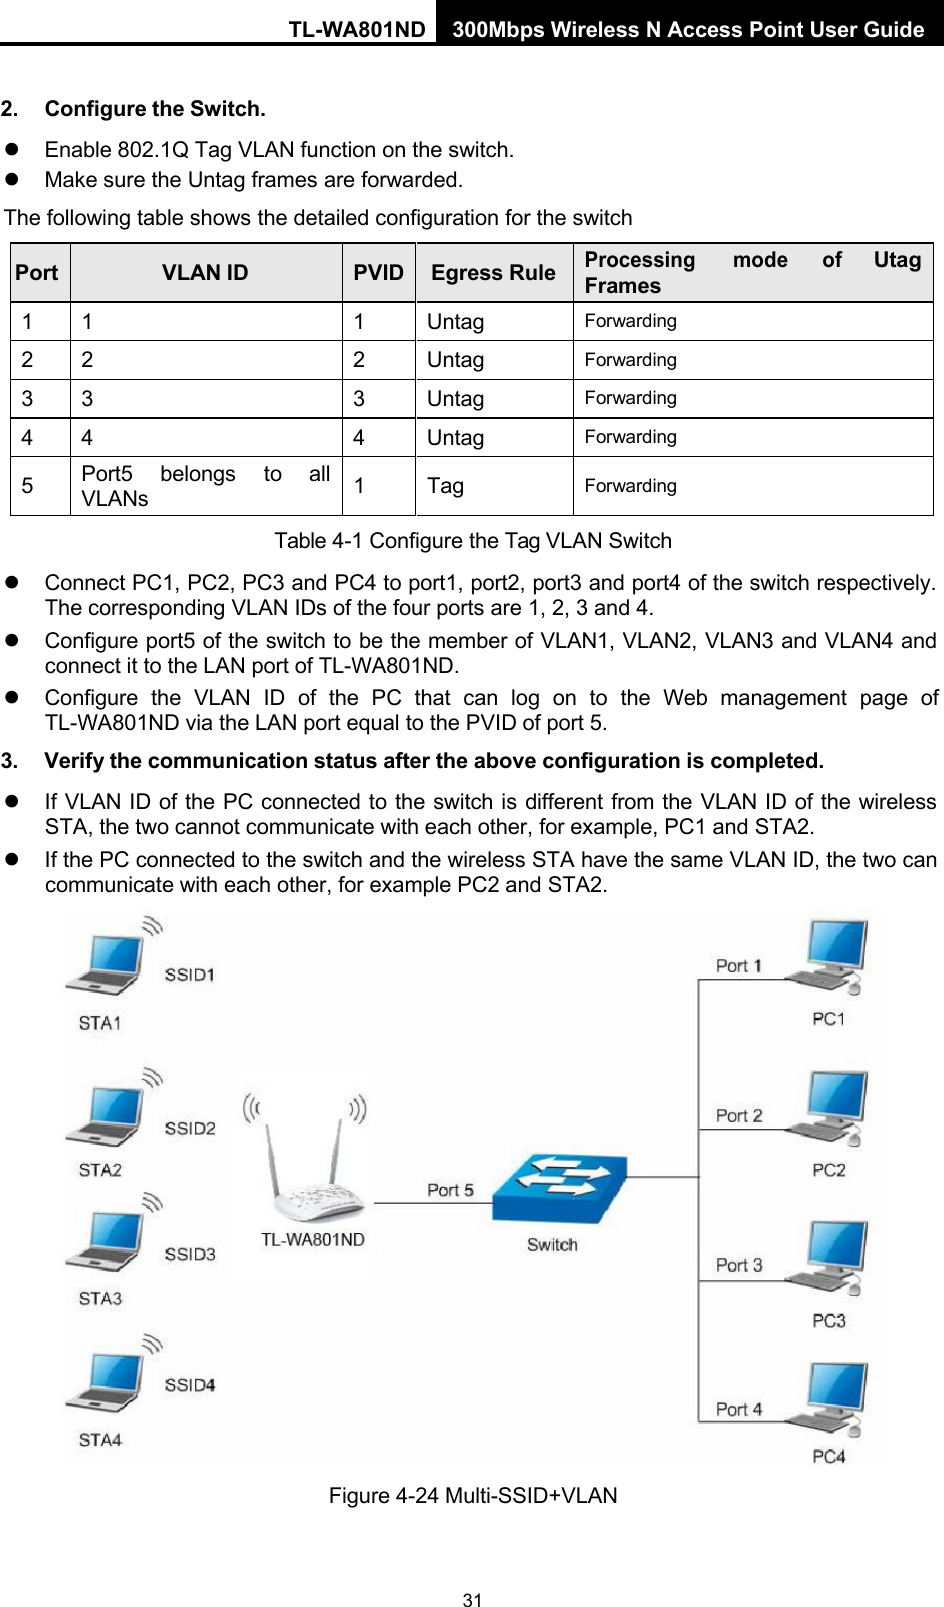 TL-WA801ND 300Mbps Wireless N Access Point User Guide 31     2. Configure the Switch.  Enable 802.1Q Tag VLAN function on the switch.  Make sure the Untag frames are forwarded. The following table shows the detailed configuration for the switch  Port VLAN ID  PVID Egress Rule Processing mode of Utag Frames 1  1  1  Untag Forwarding 2  2  2  Untag Forwarding 3  3  3  Untag Forwarding 4  4  4  Untag Forwarding 5  Port5 VLANs belongs to all 1  Tag  Forwarding Table 4-1 Configure the Tag VLAN Switch  Connect PC1, PC2, PC3 and PC4 to port1, port2, port3 and port4 of the switch respectively. The corresponding VLAN IDs of the four ports are 1, 2, 3 and 4.  Configure port5 of the switch to be the member of VLAN1, VLAN2, VLAN3 and VLAN4 and connect it to the LAN port of TL-WA801ND.  Configure  the  VLAN  ID  of  the  PC  that  can  log  on  to  the  Web  management  page  of TL-WA801ND via the LAN port equal to the PVID of port 5. 3. Verify the communication status after the above configuration is completed.  If VLAN ID of the PC connected to the switch is different from the VLAN ID of the wireless STA, the two cannot communicate with each other, for example, PC1 and STA2.  If the PC connected to the switch and the wireless STA have the same VLAN ID, the two can communicate with each other, for example PC2 and STA2.   Figure 4-24 Multi-SSID+VLAN 